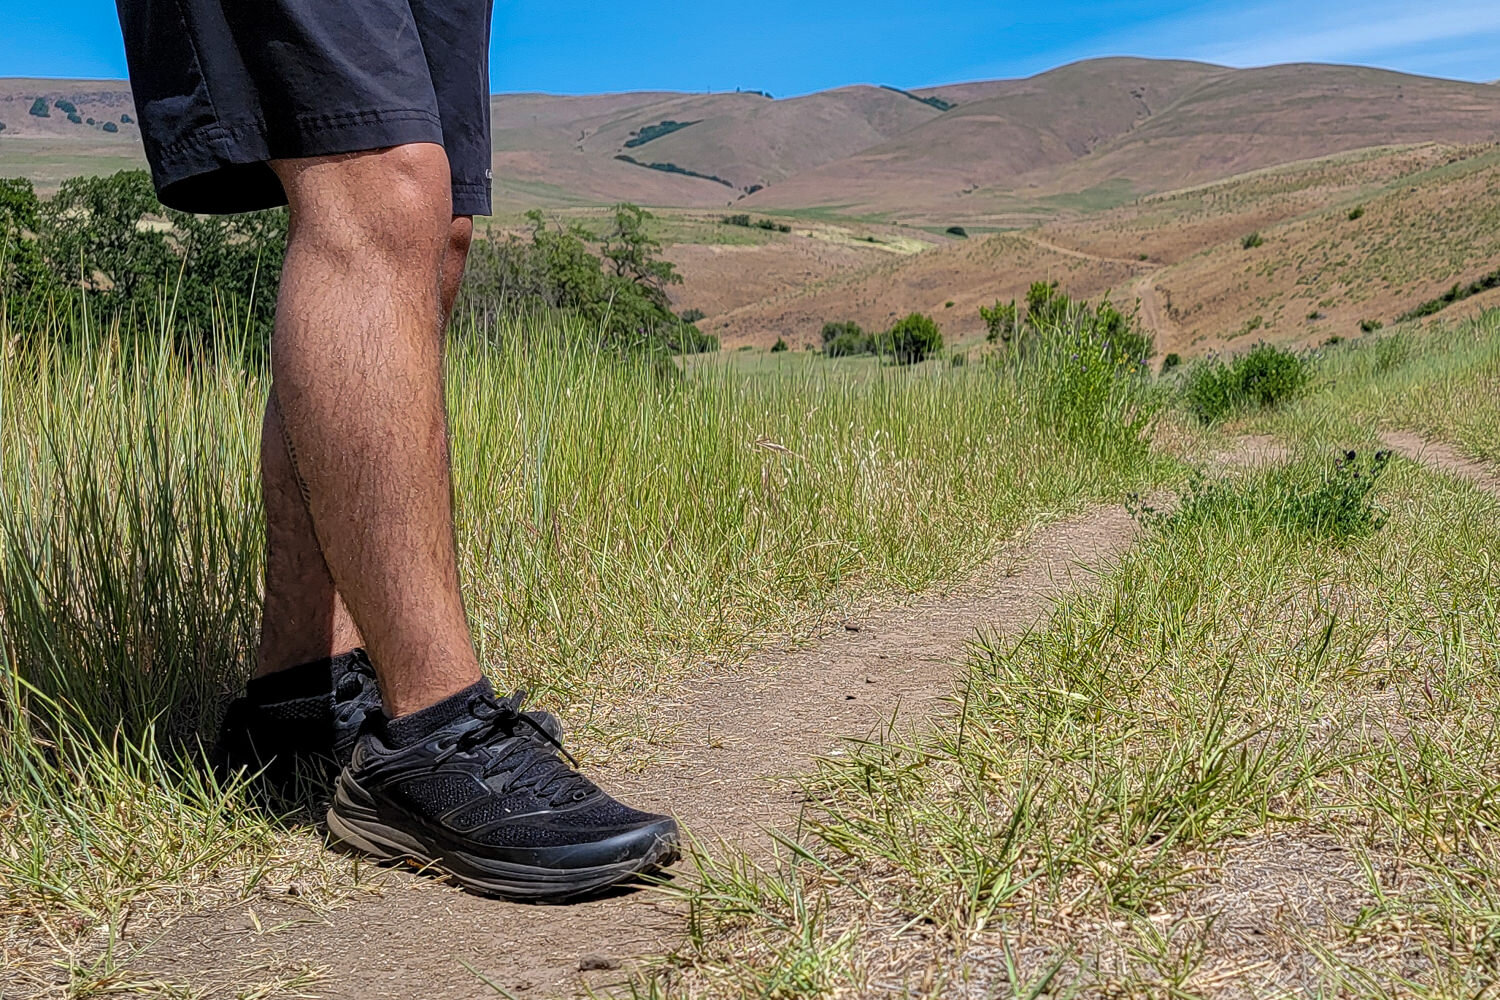 The Topo Ultraventure 2 trail runners are lightweight, breathable, and flexible